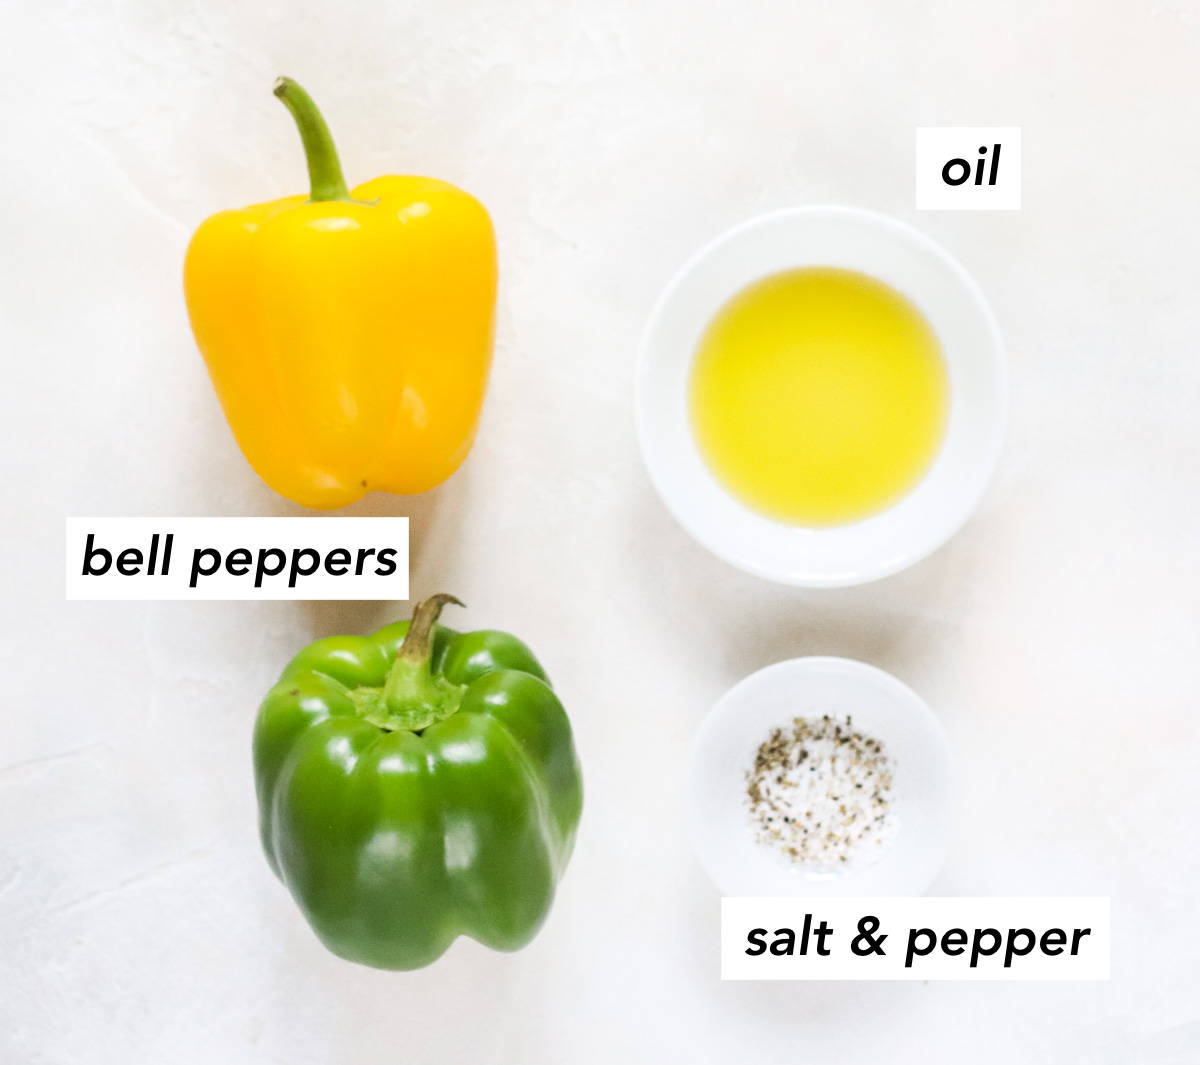 yellow bell pepper, green bell pepper, bowl of salt and pepper, and a bowl of olive oil on a white counter.